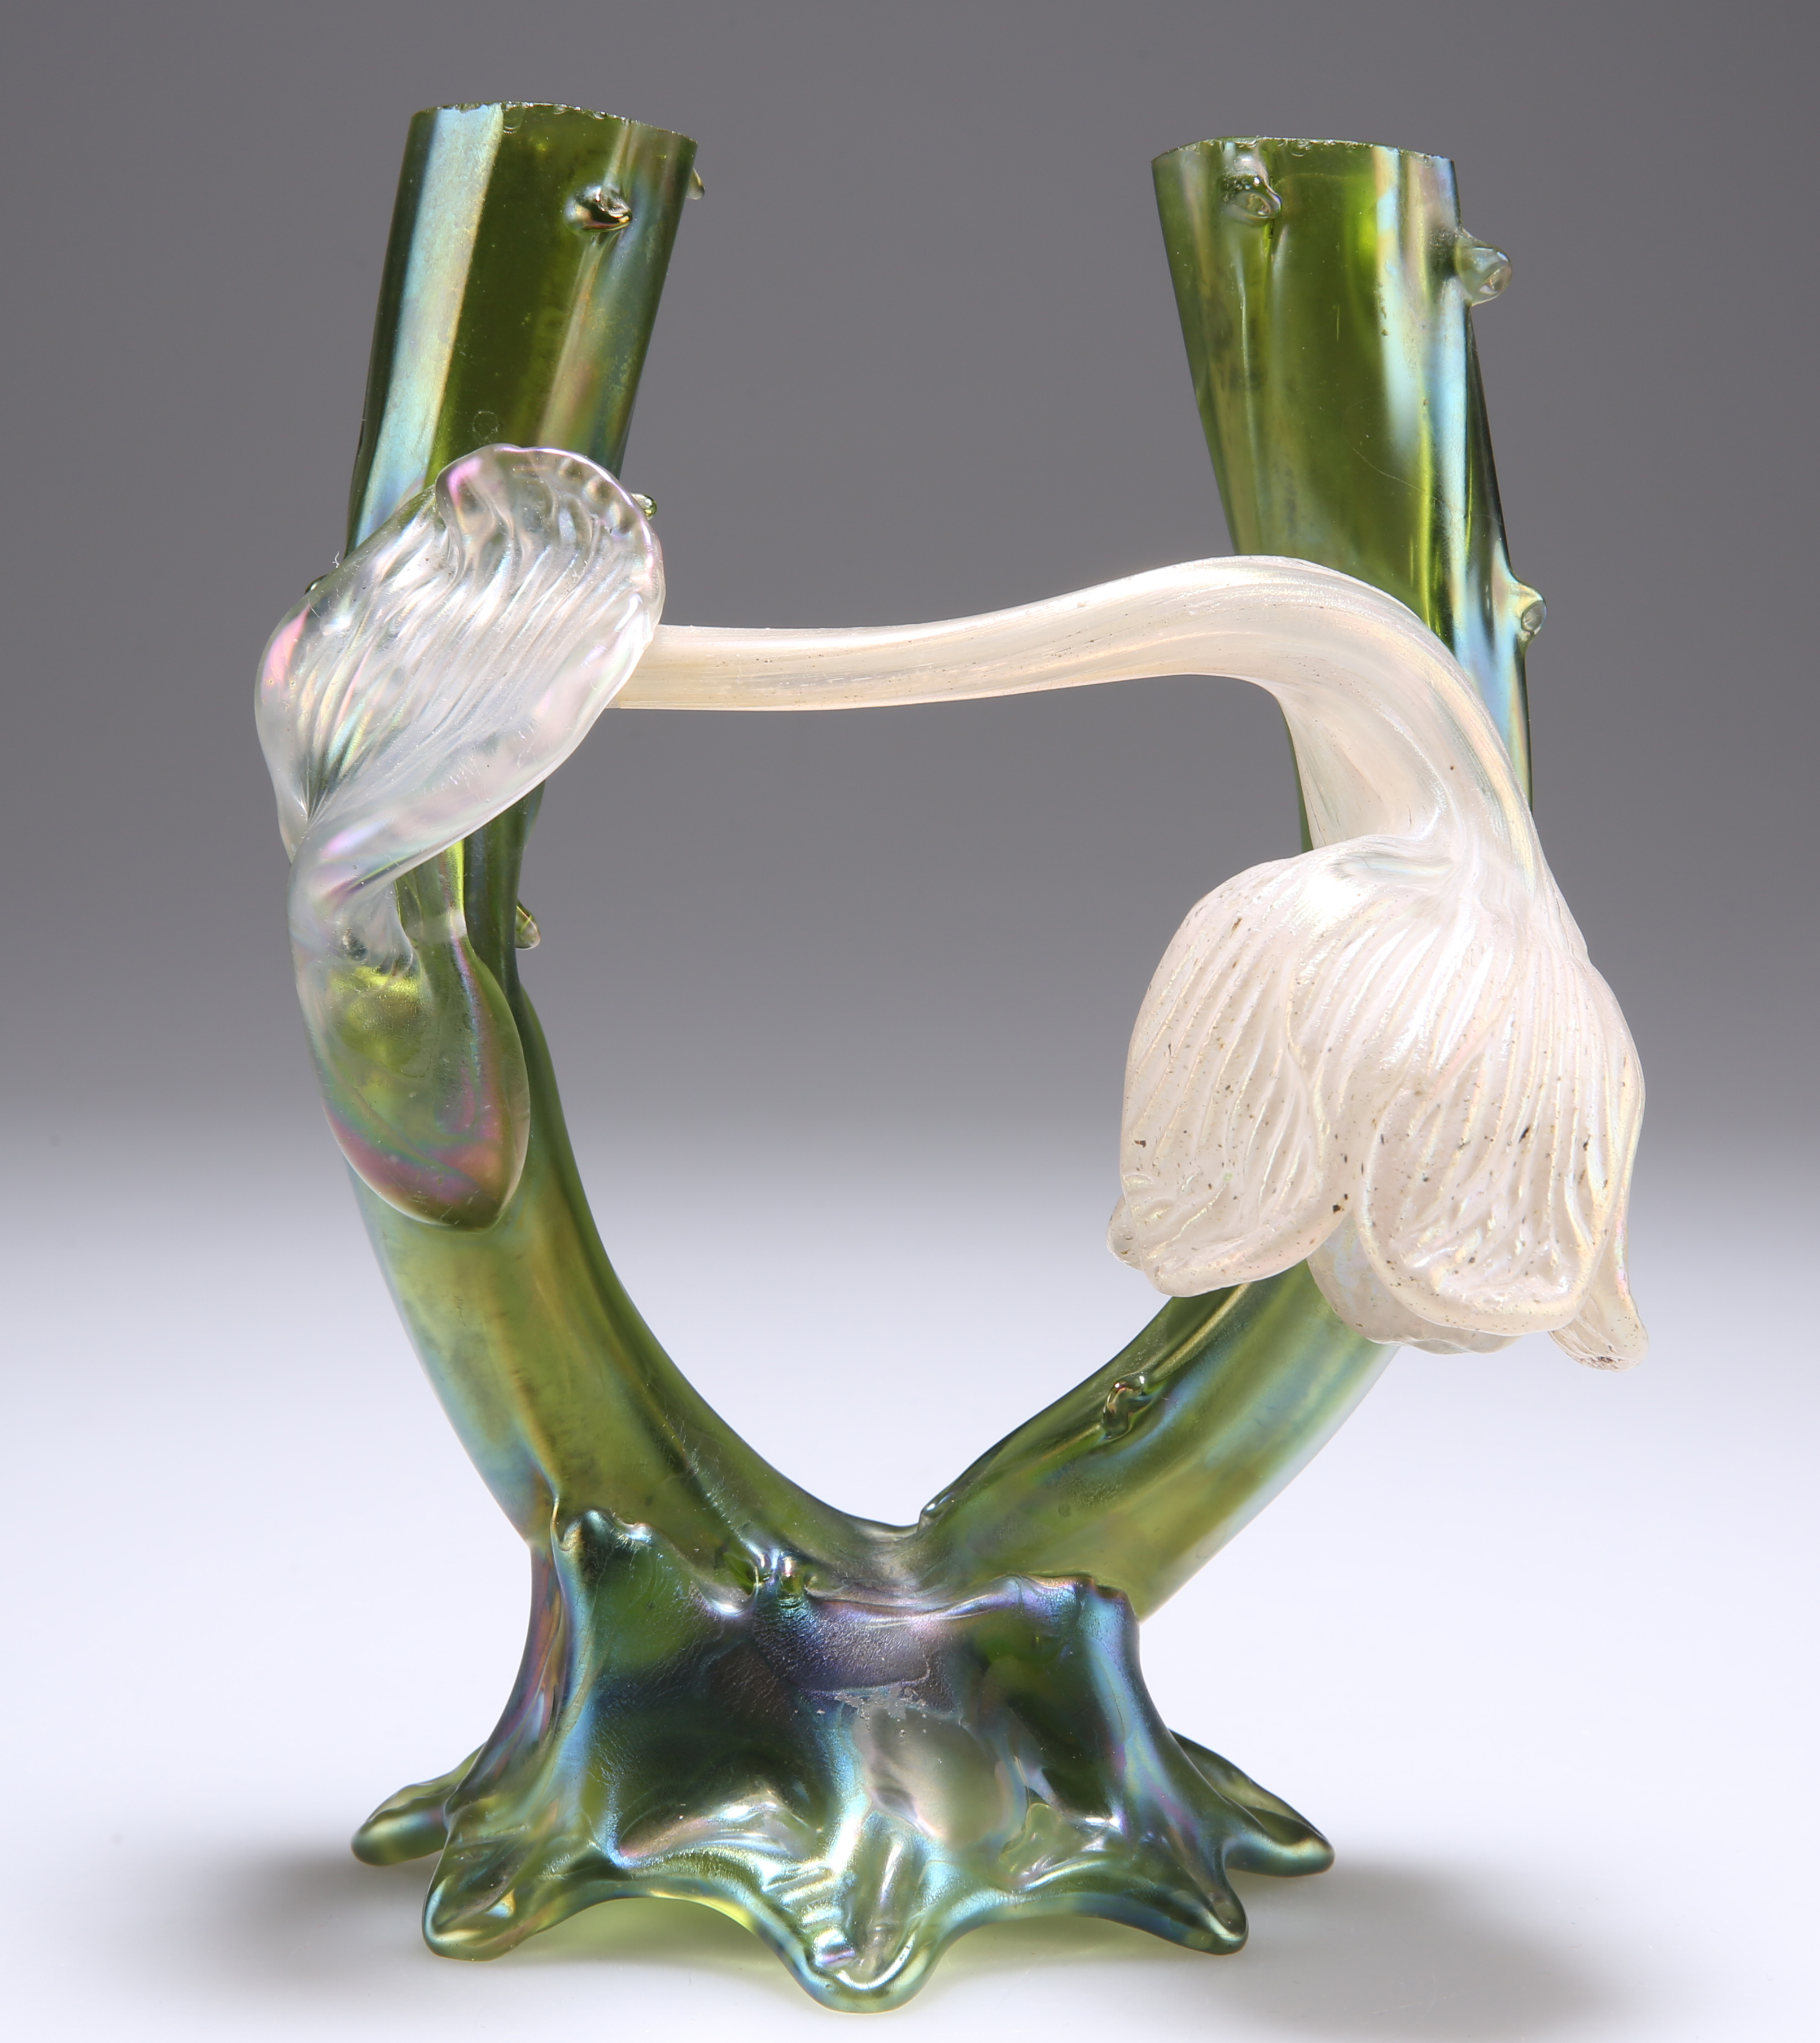 KRALIK, AN EARLY 20TH CENTURY SECESSIONIST GLASS BUD VASE